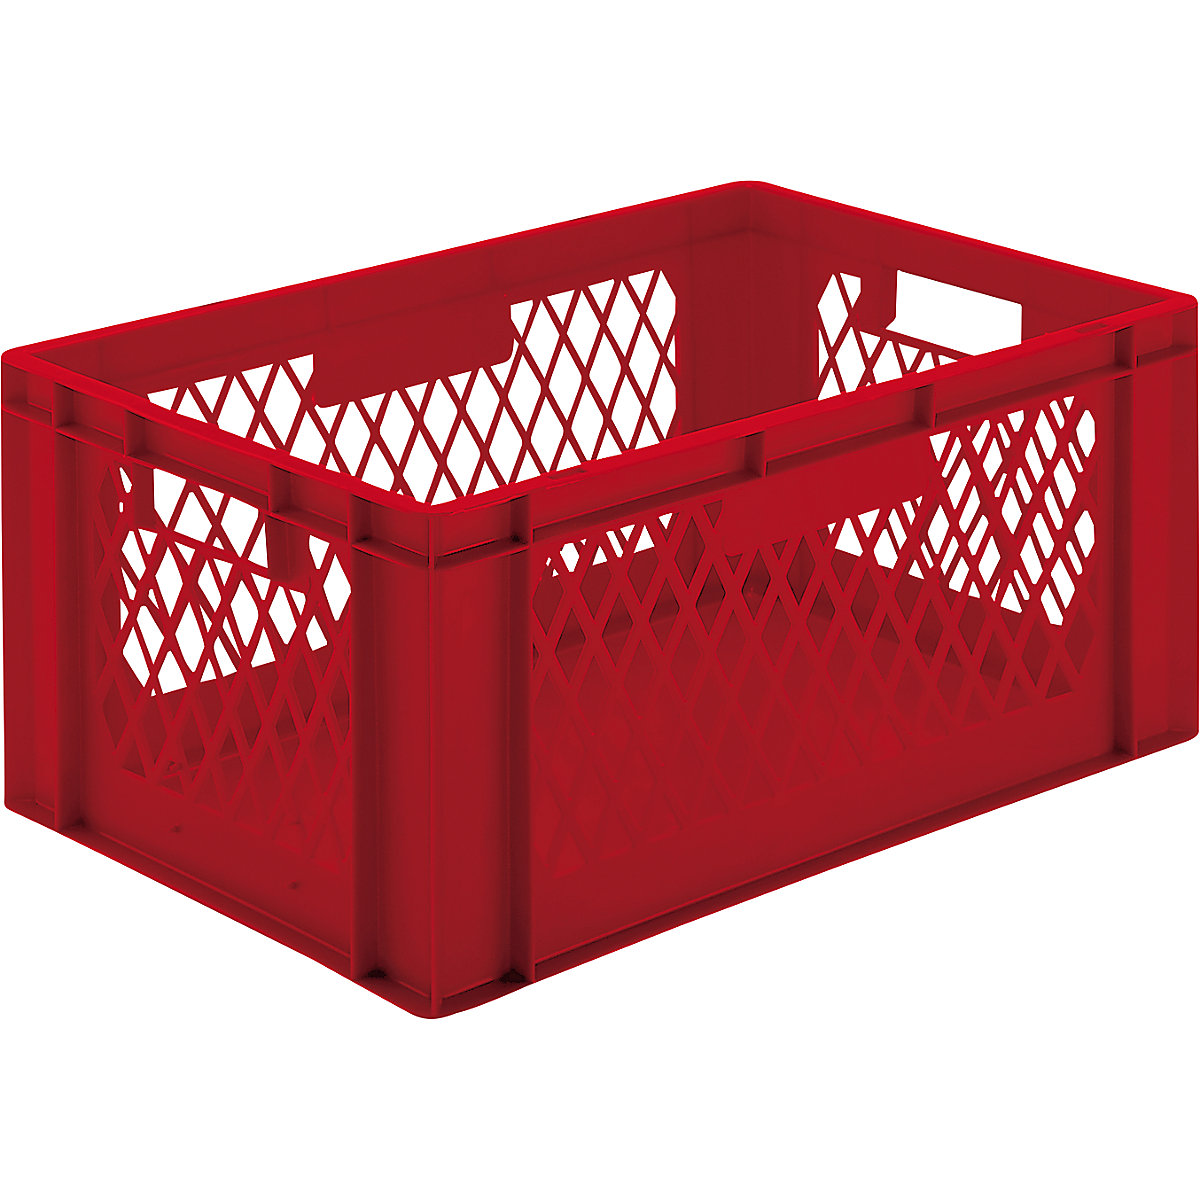 Euro stacking container, perforated walls, closed base, LxWxH 600 x 400 x 270 mm, red, pack of 5-8